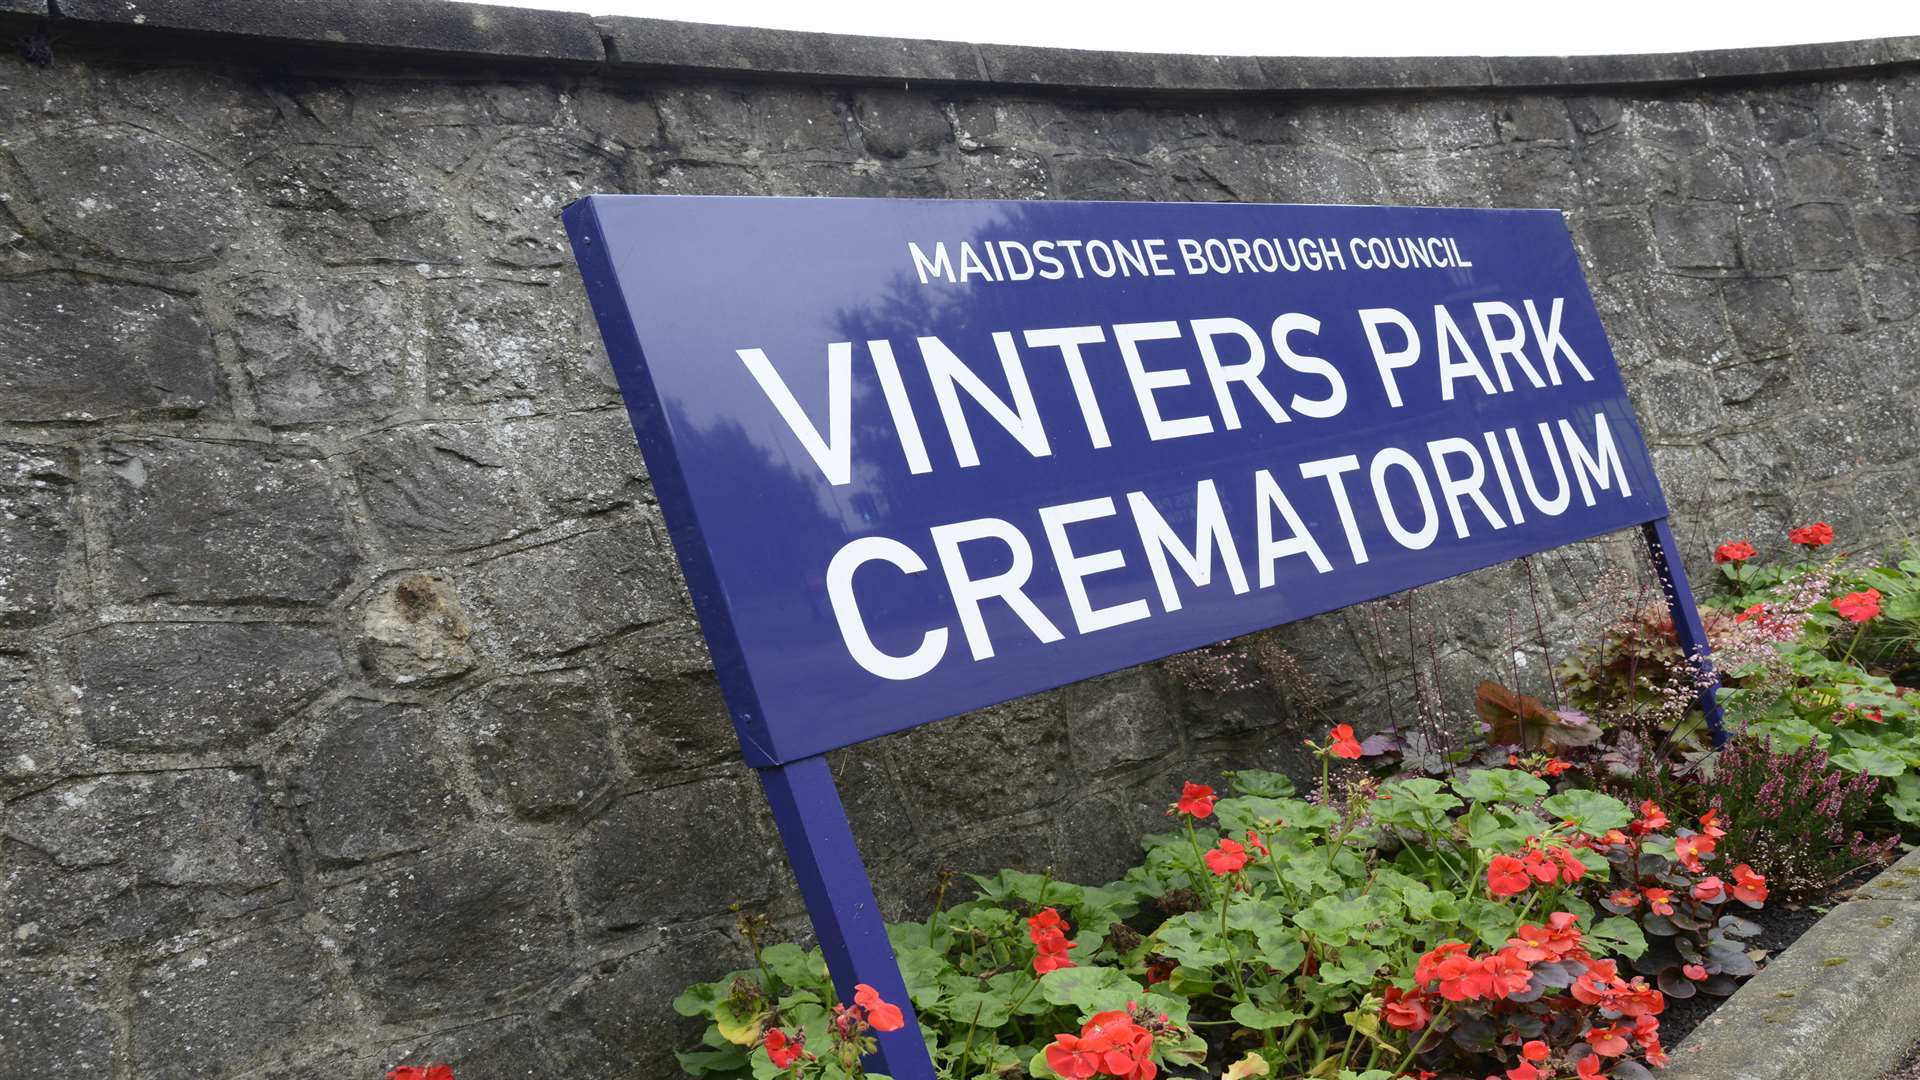 Pet owners will soon have an area for cremations at Vinters Park